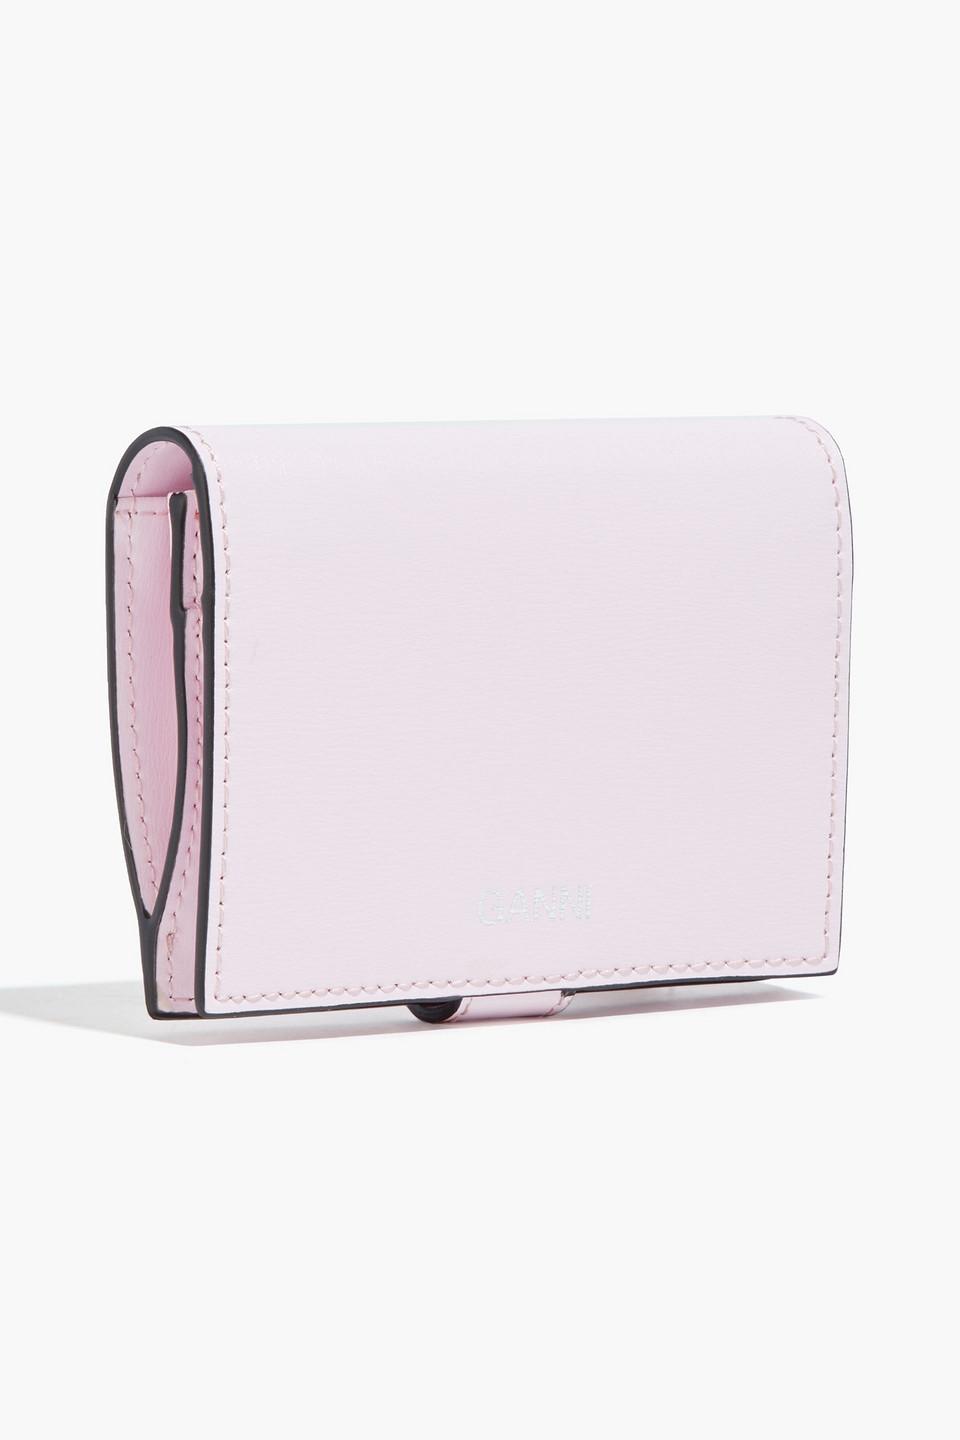 Ganni Leather Cardholder in Baby Pink (Pink) - Lyst